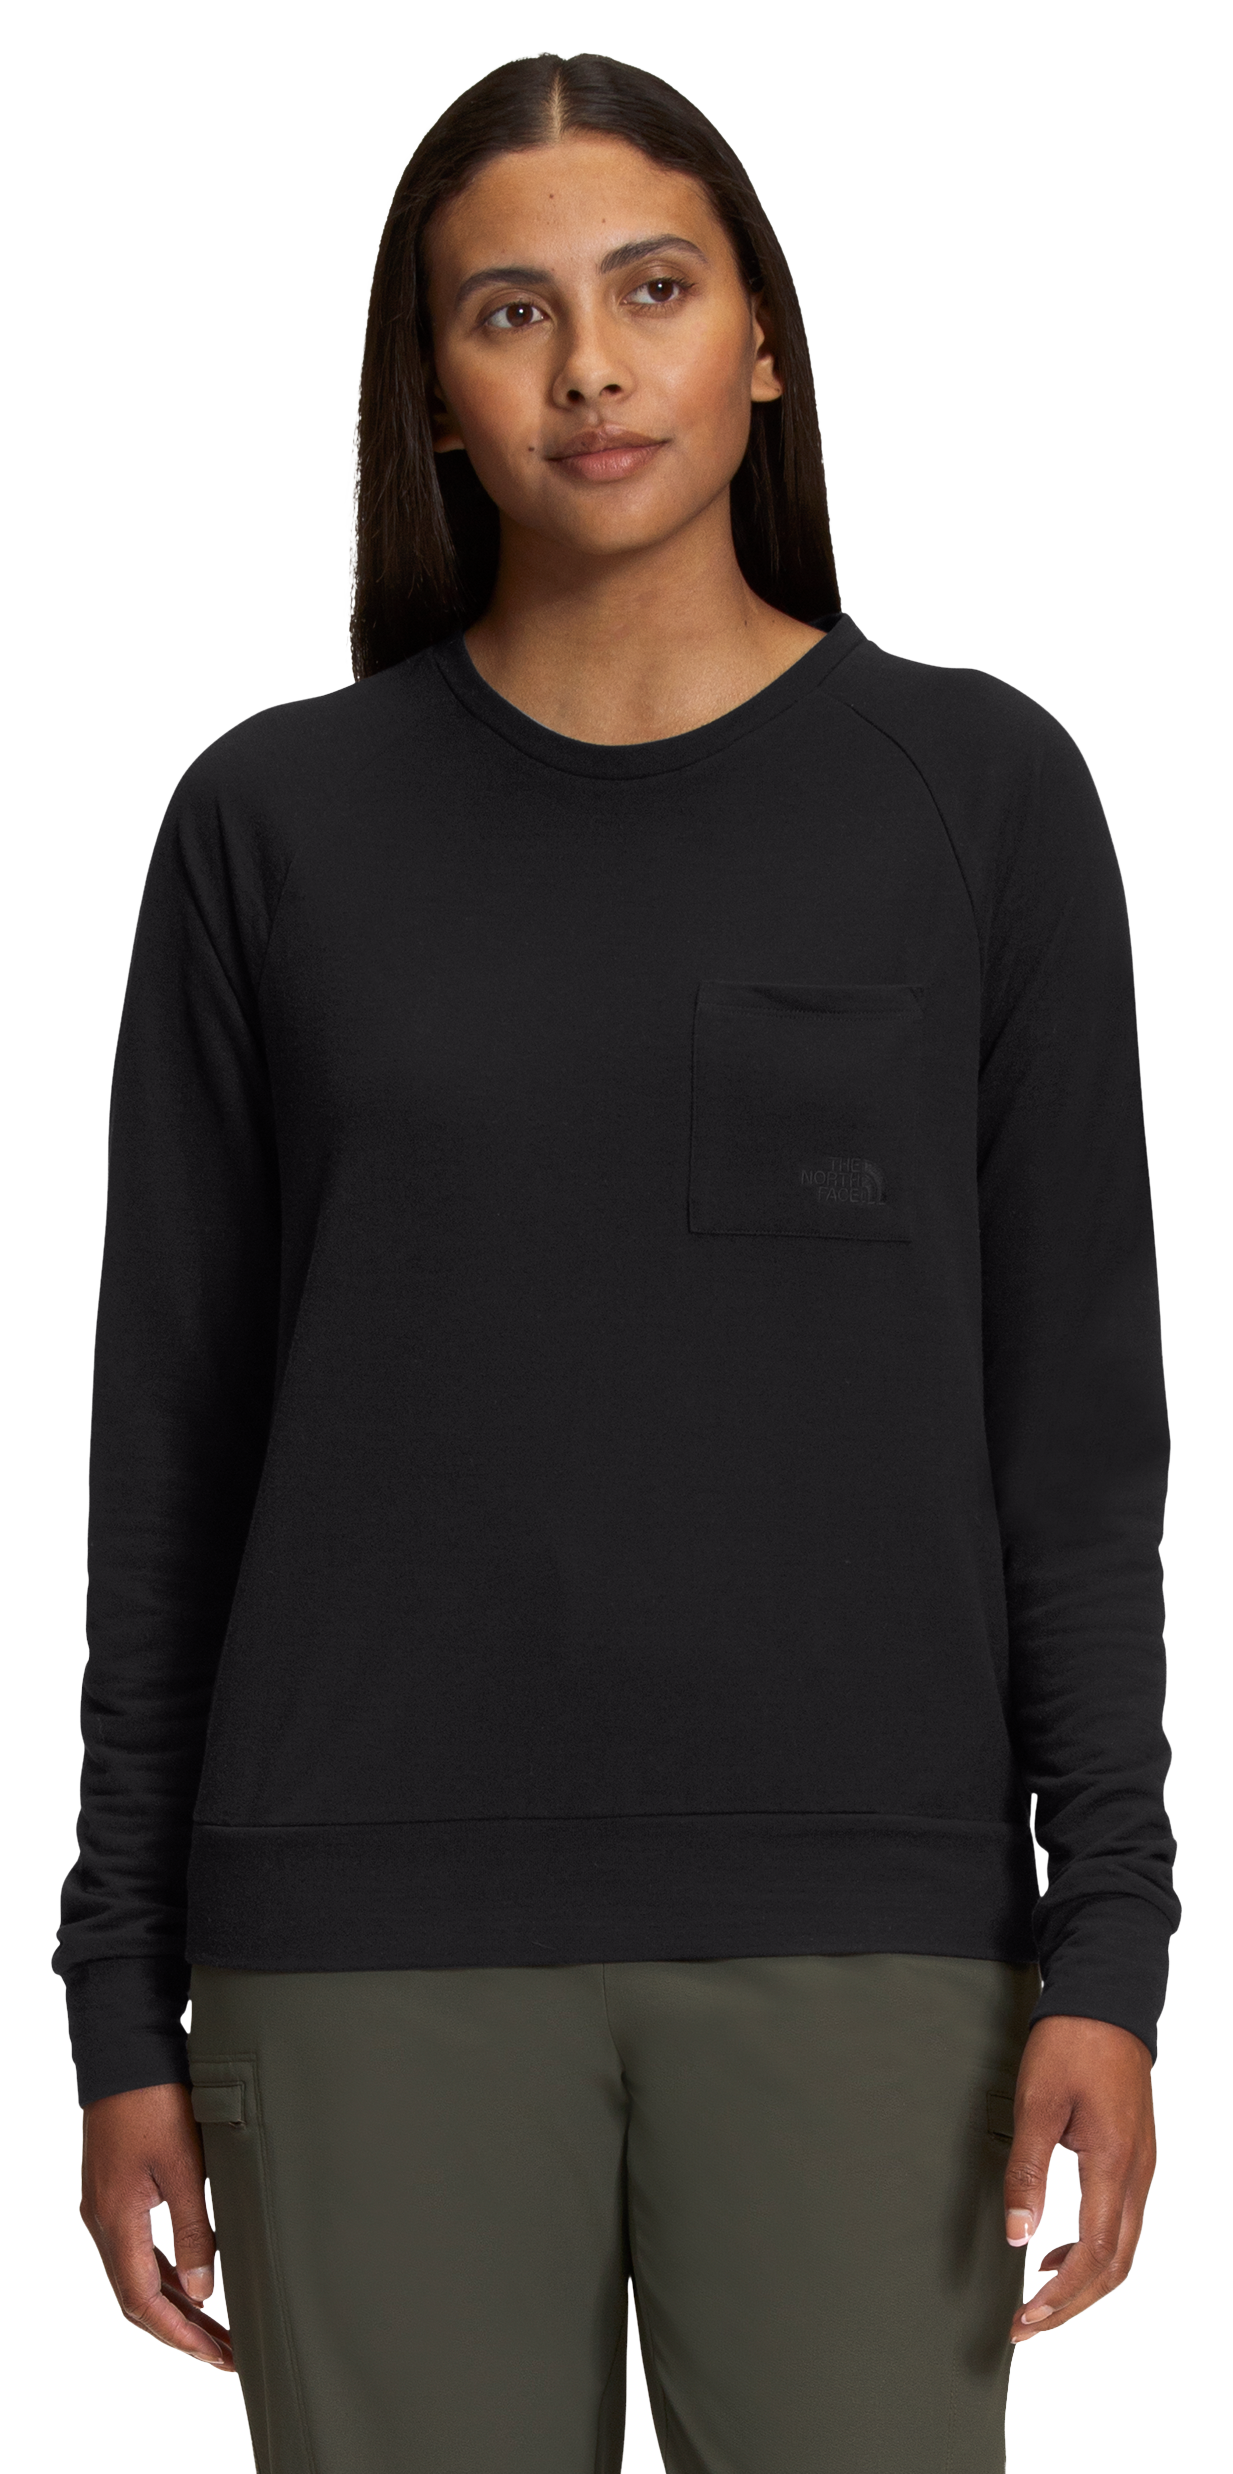 The North Face Westbrae Knit Long-Sleeve Crew for Ladies